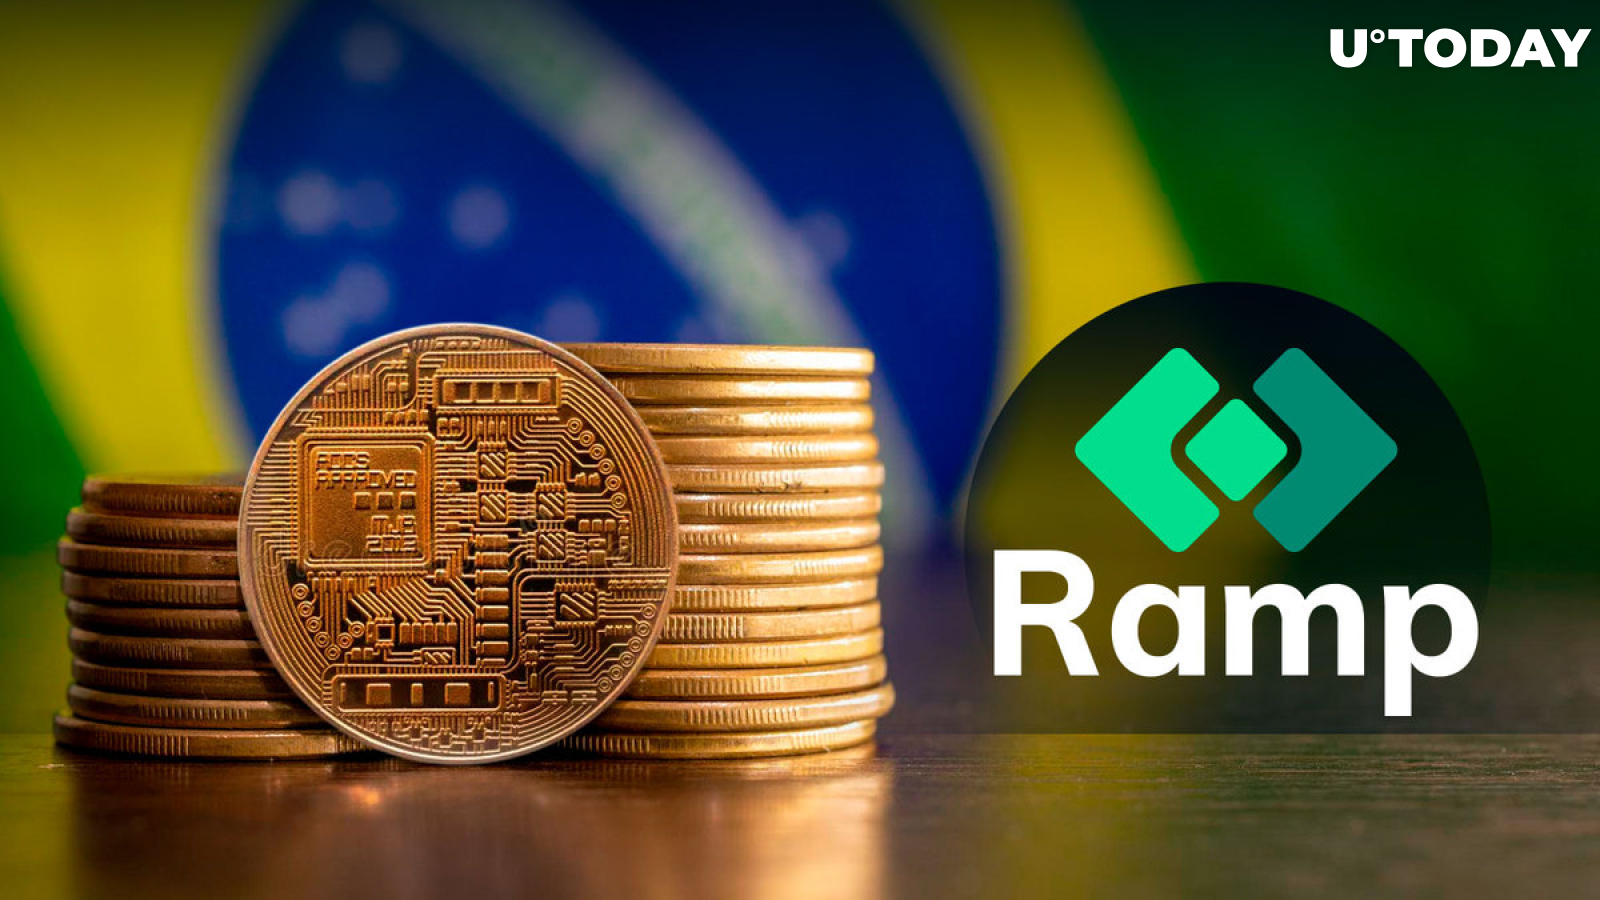 Ramp Introduces Swift Verification for Crypto Buys in Brazil Without Paperwork